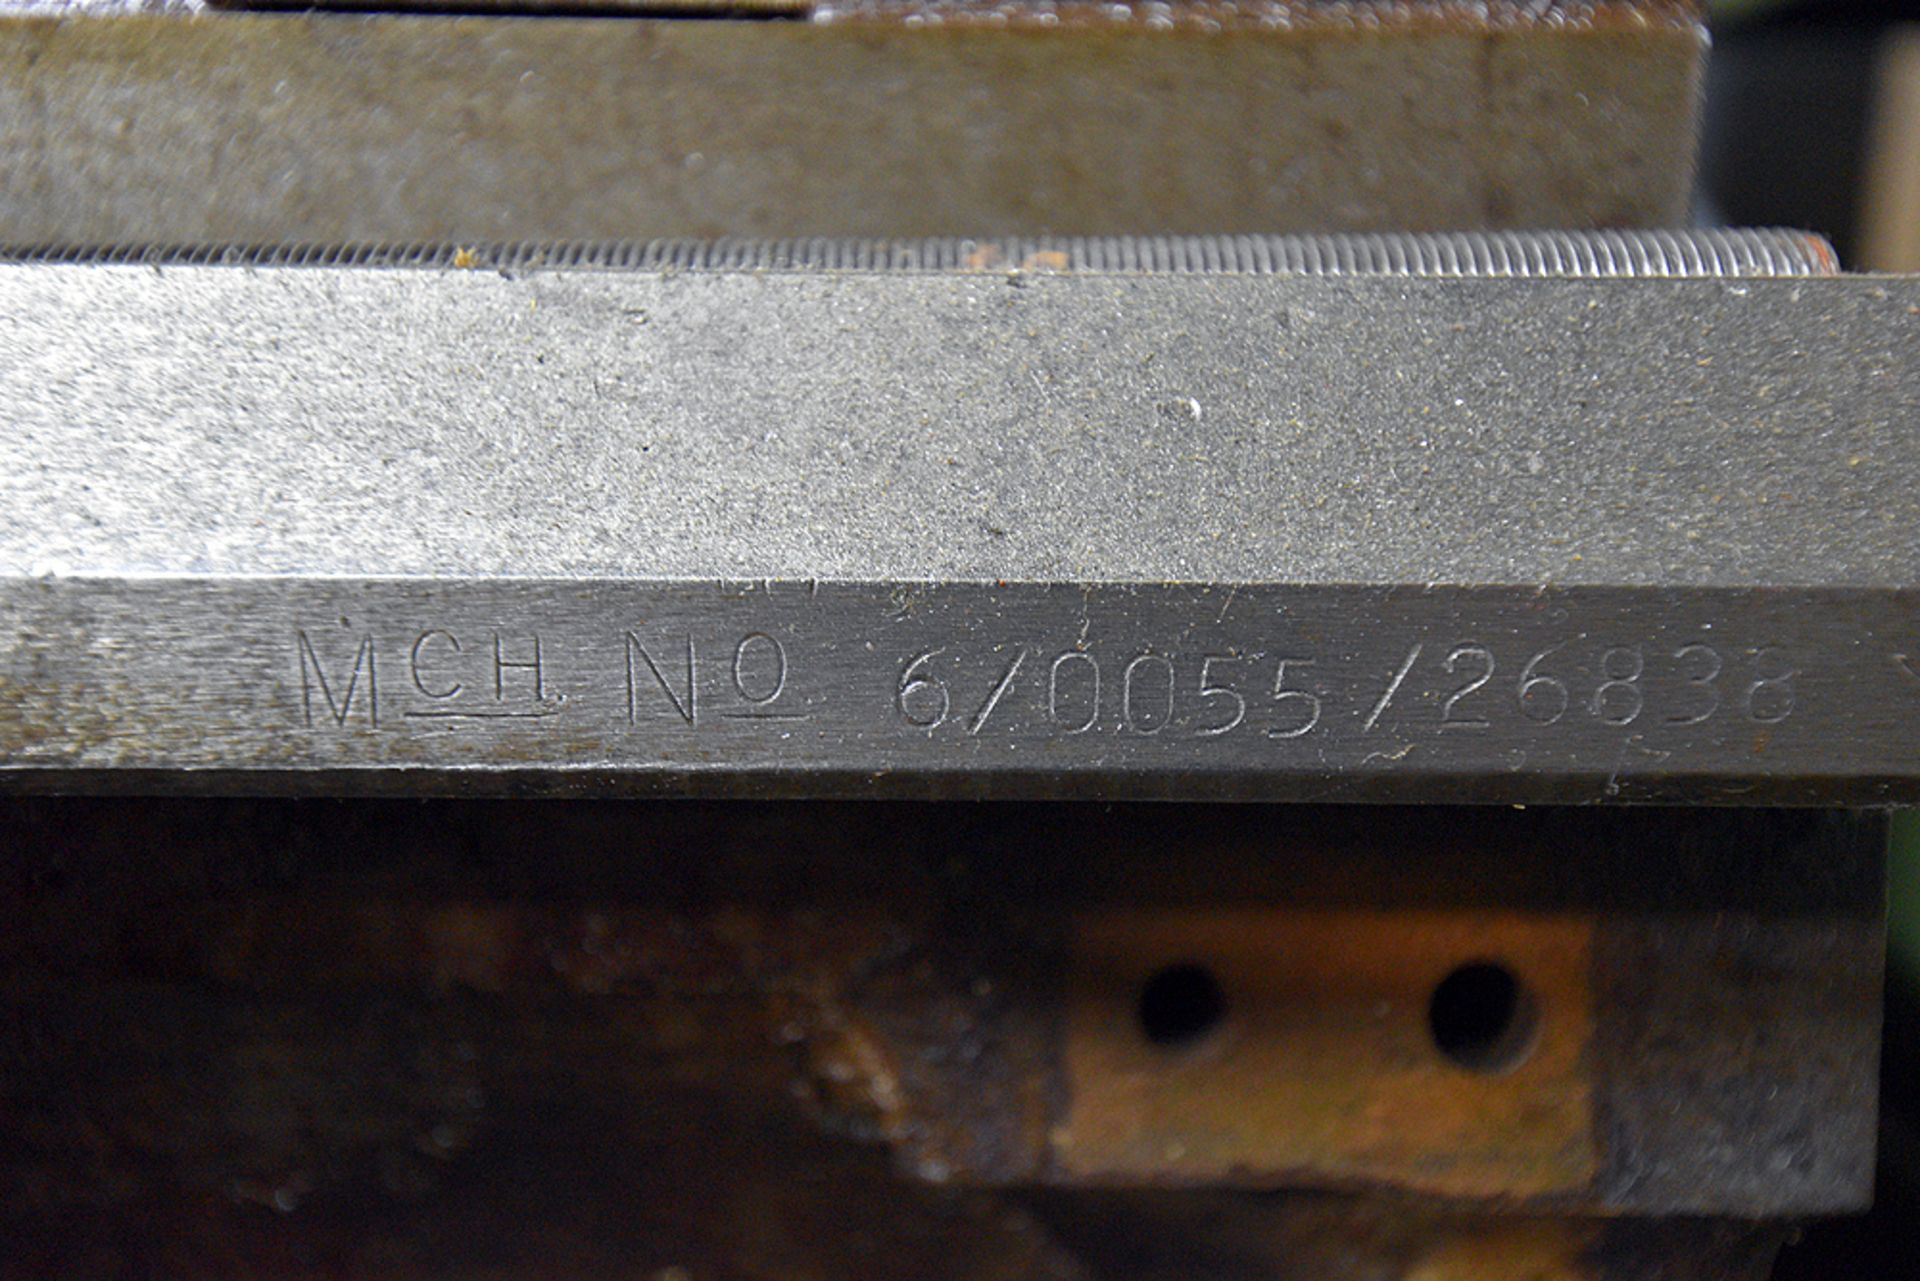 Clausing-Colchester 16" Lathe 16"x52", Machine No 610055/26838 - Image 7 of 7